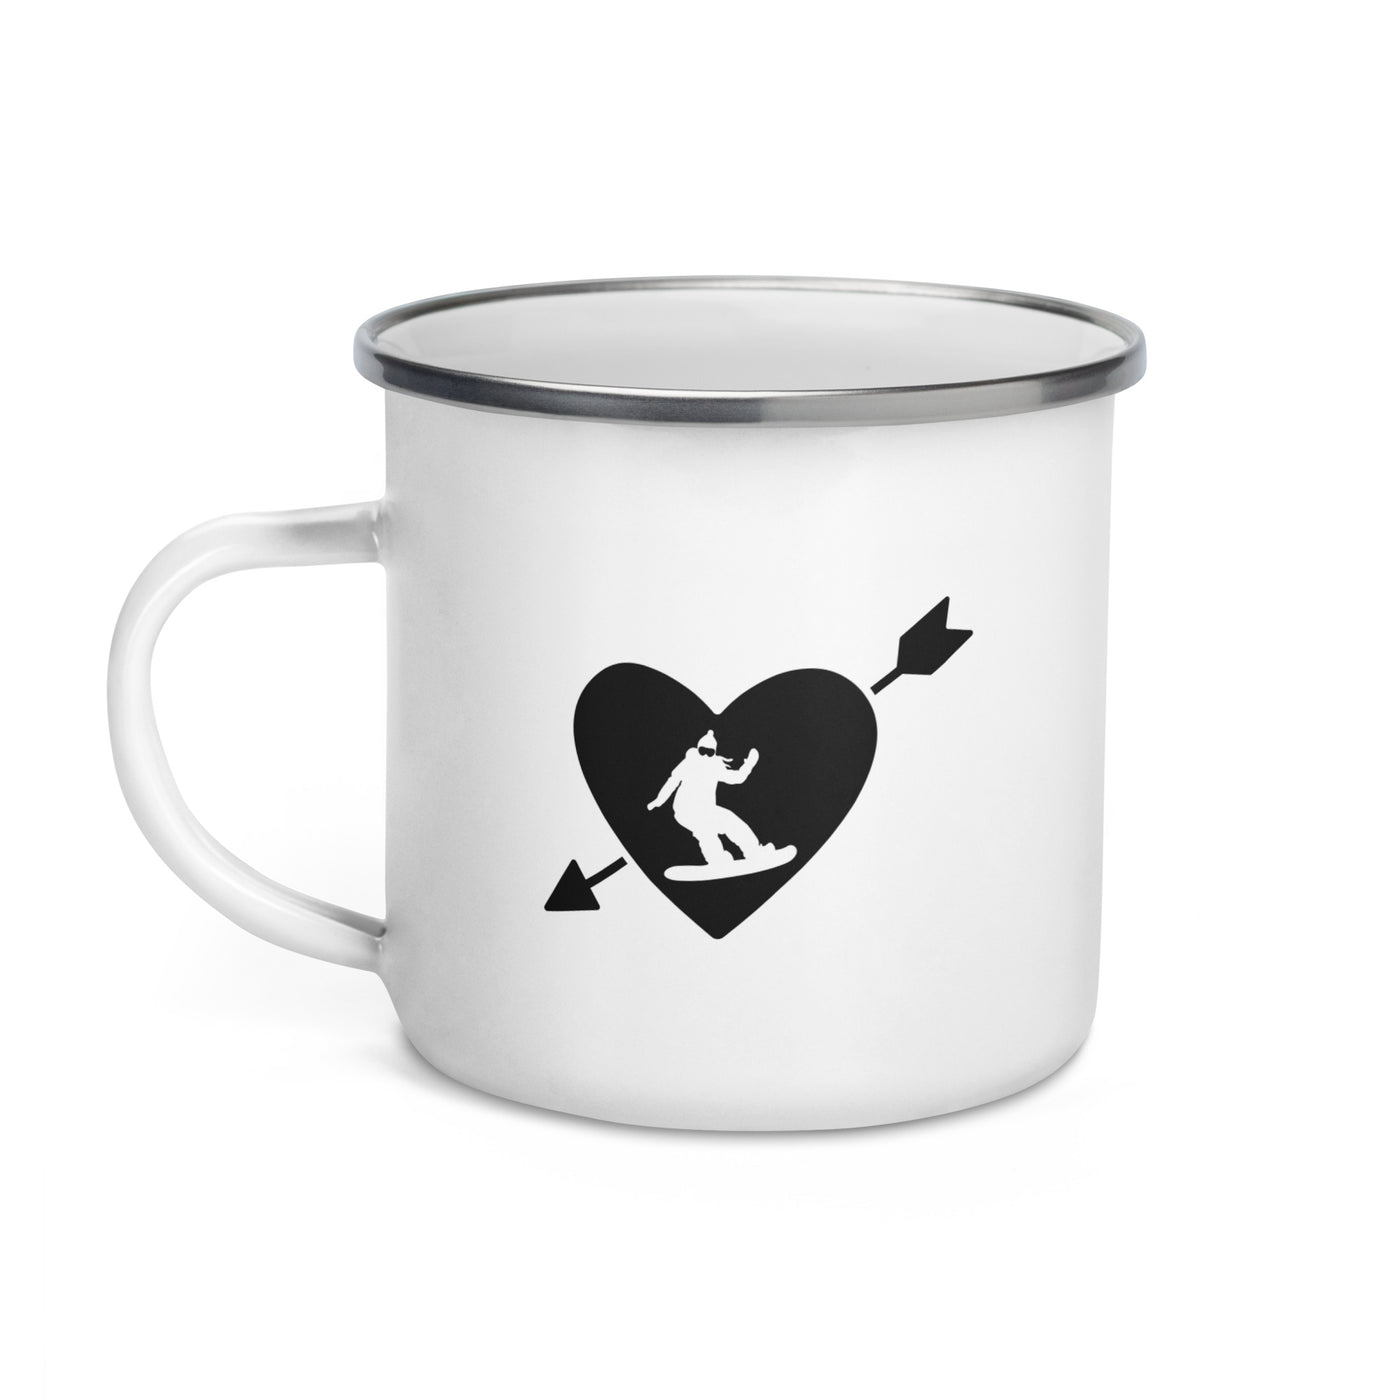 Arrow Heart And Snowboarding 1 - Emaille Tasse snowboarden